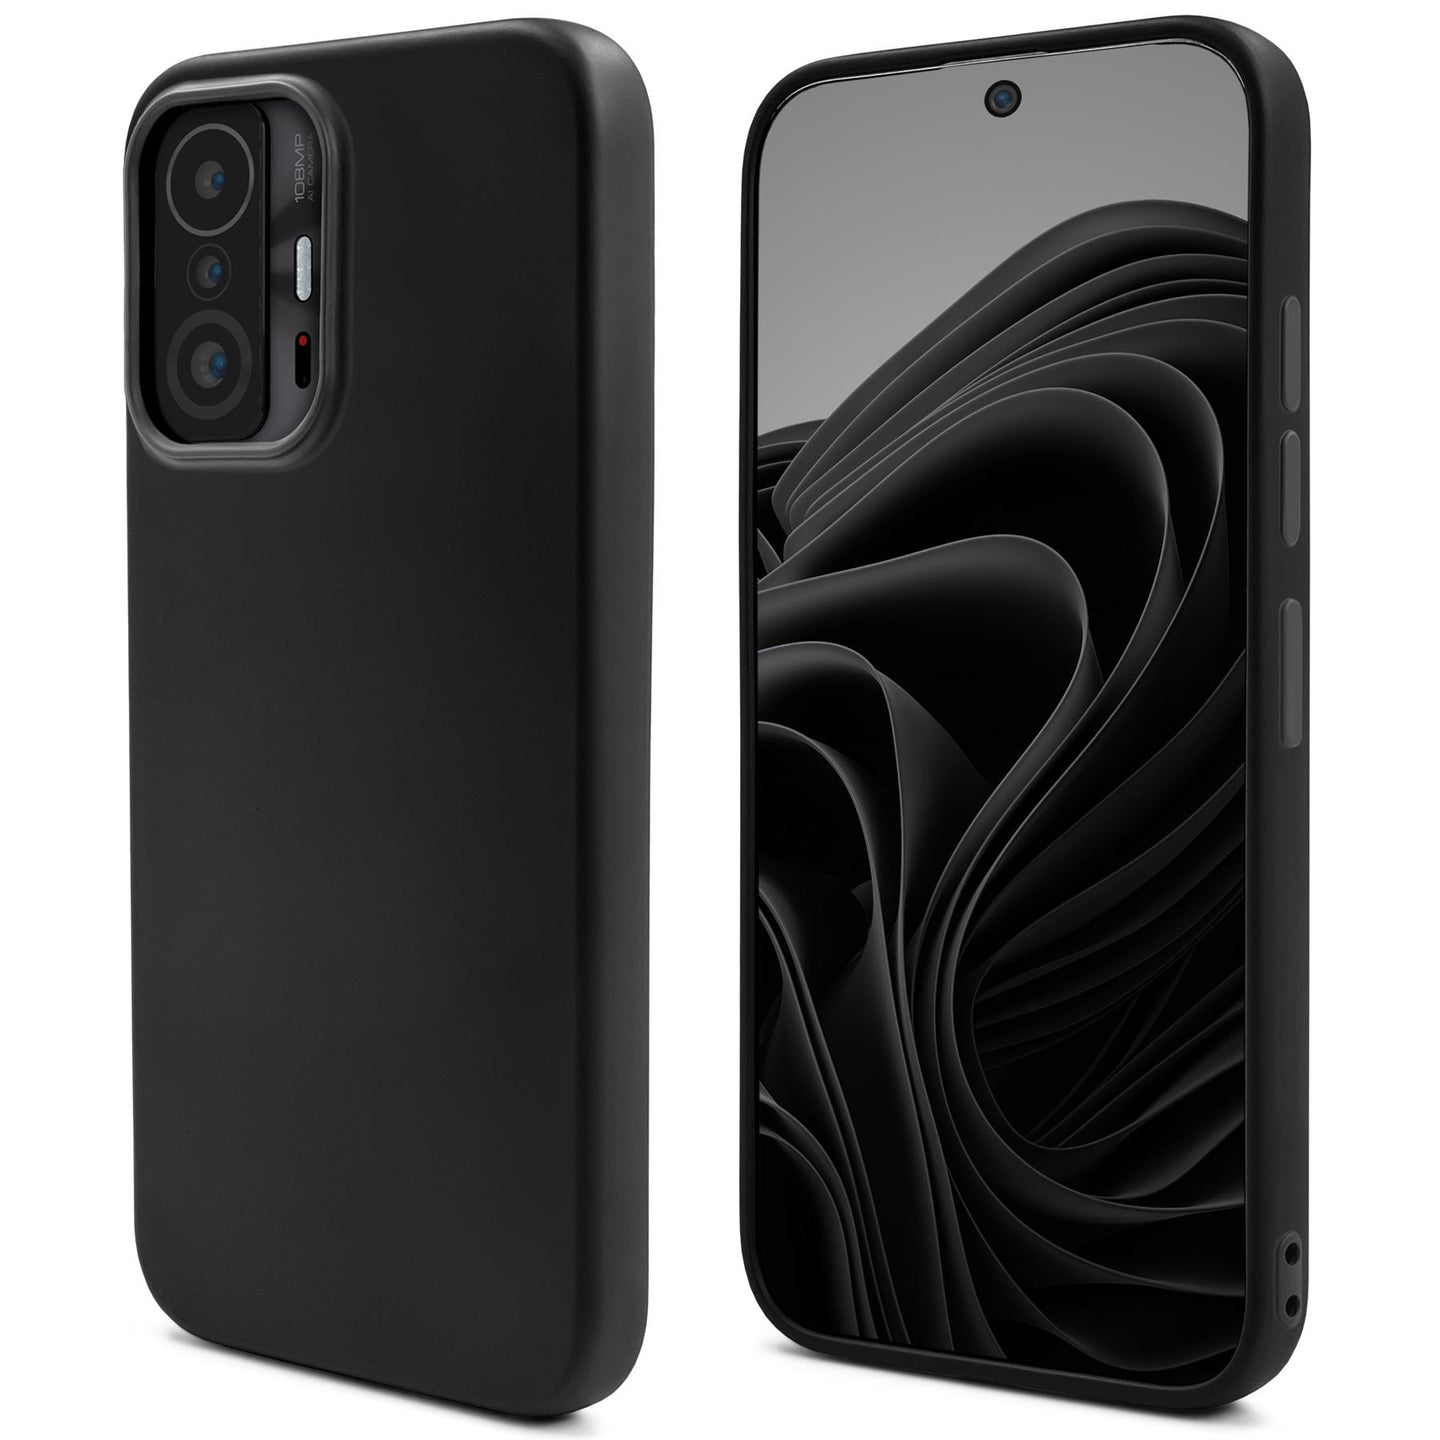 Moozy Lifestyle. Silicone Case for Xiaomi 11T and 11T Pro, Black - Liquid Silicone Lightweight Cover with Matte Finish and Soft Microfiber Lining, Premium Silicone Case